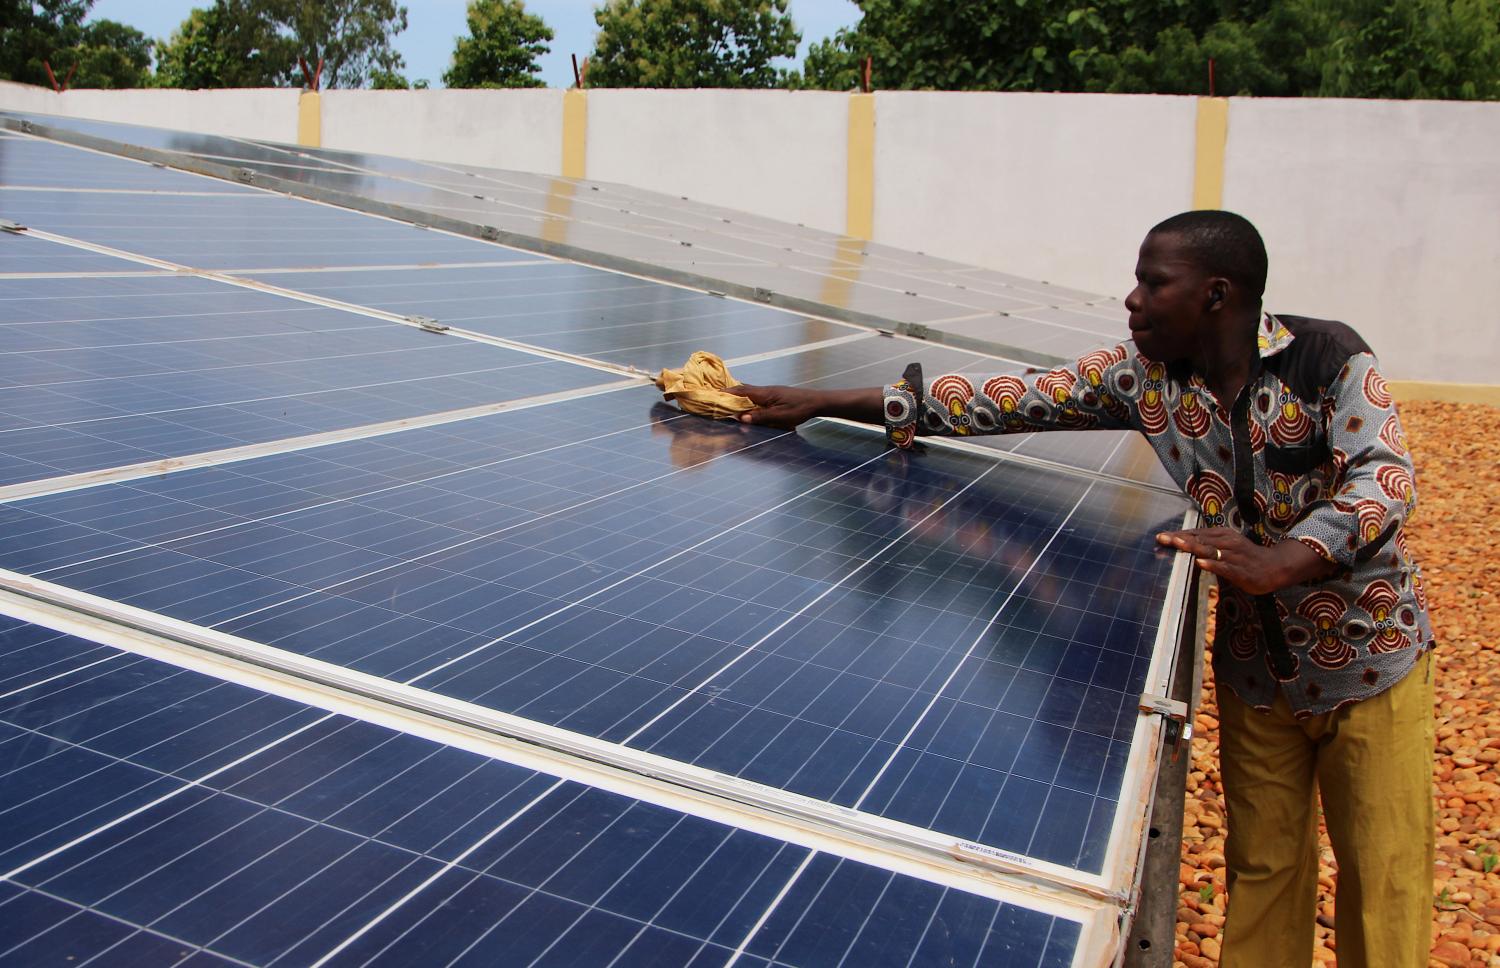 A technician cleans solar panels, part of the BBOXX and EDF solar energy system used to provide electricity to Sikpe Afidegnon village, Togo May 16, 2019. Picture taken May 16, 2019. REUTERS/Noel Kokou Tadegnon - RC123FE24560